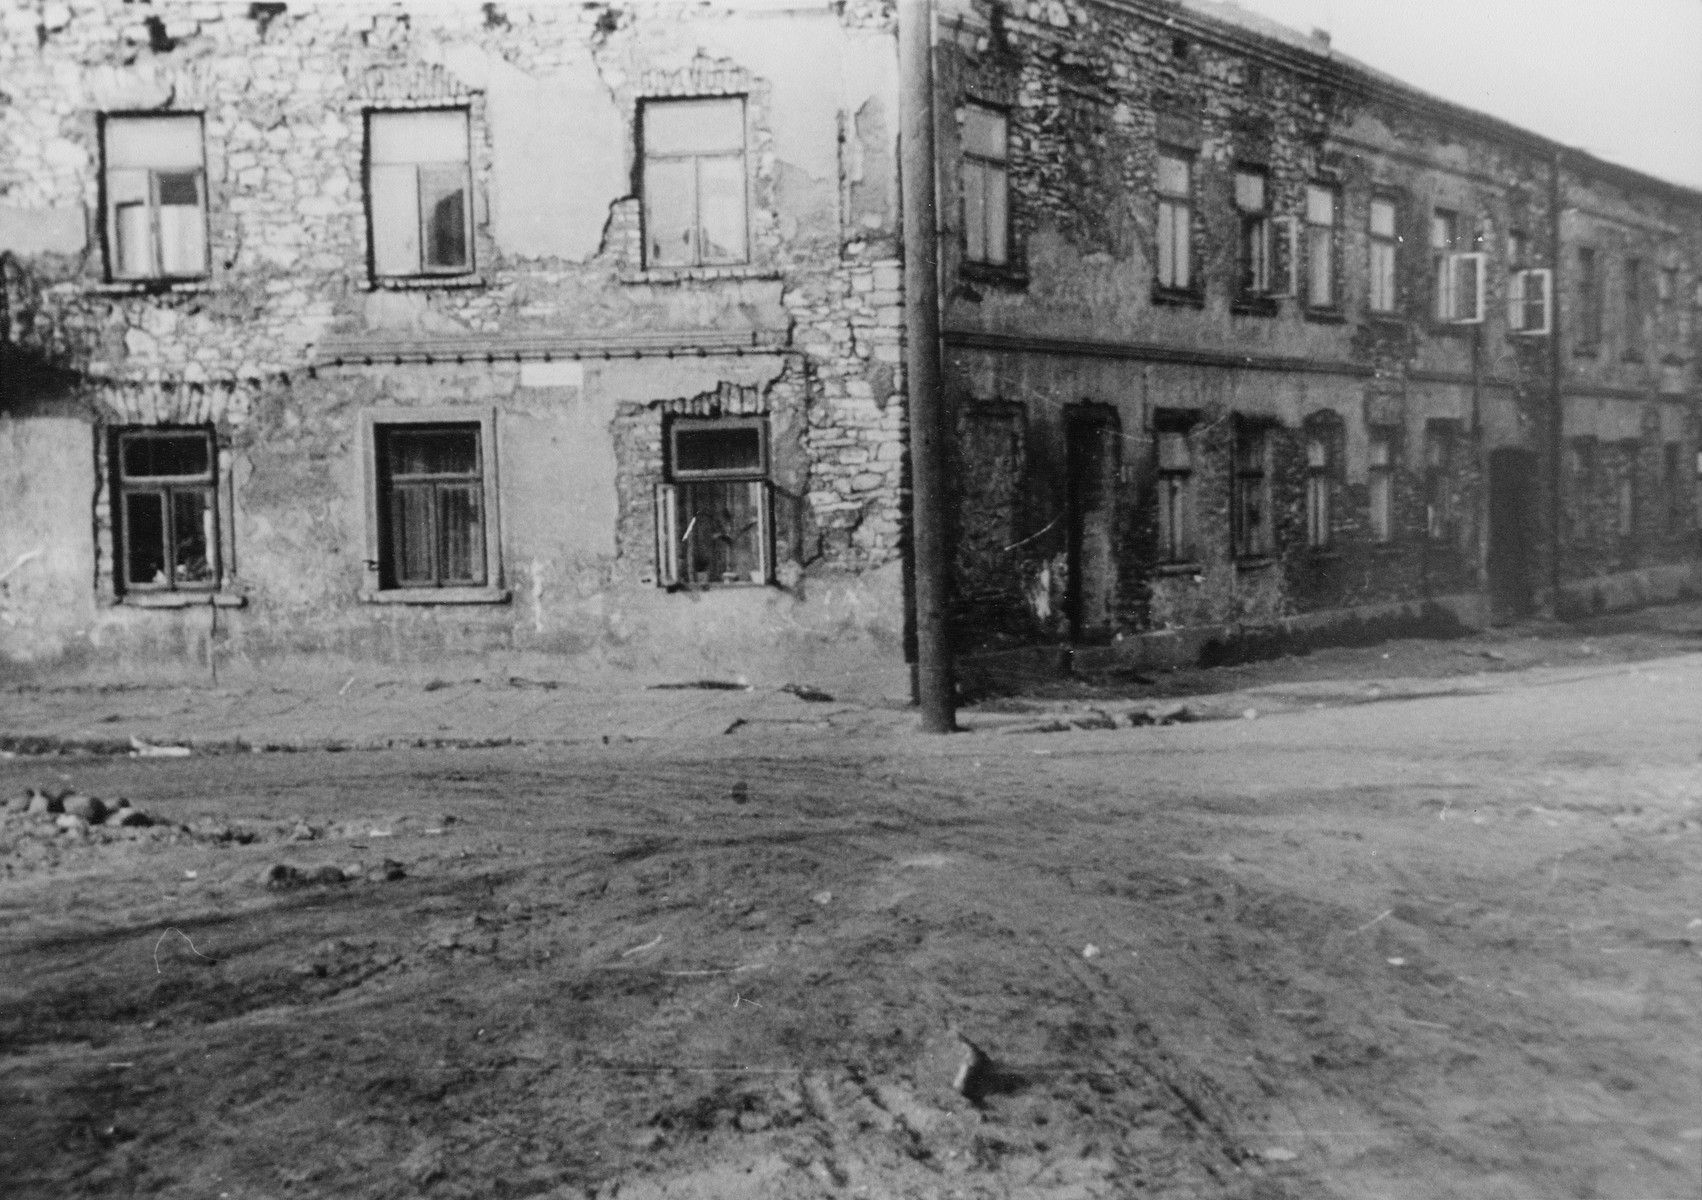 View of an abandoned building at the intersection of Rynek Warszawski and Jaskrowska Streets in Czestochowa, where the German police station was located.